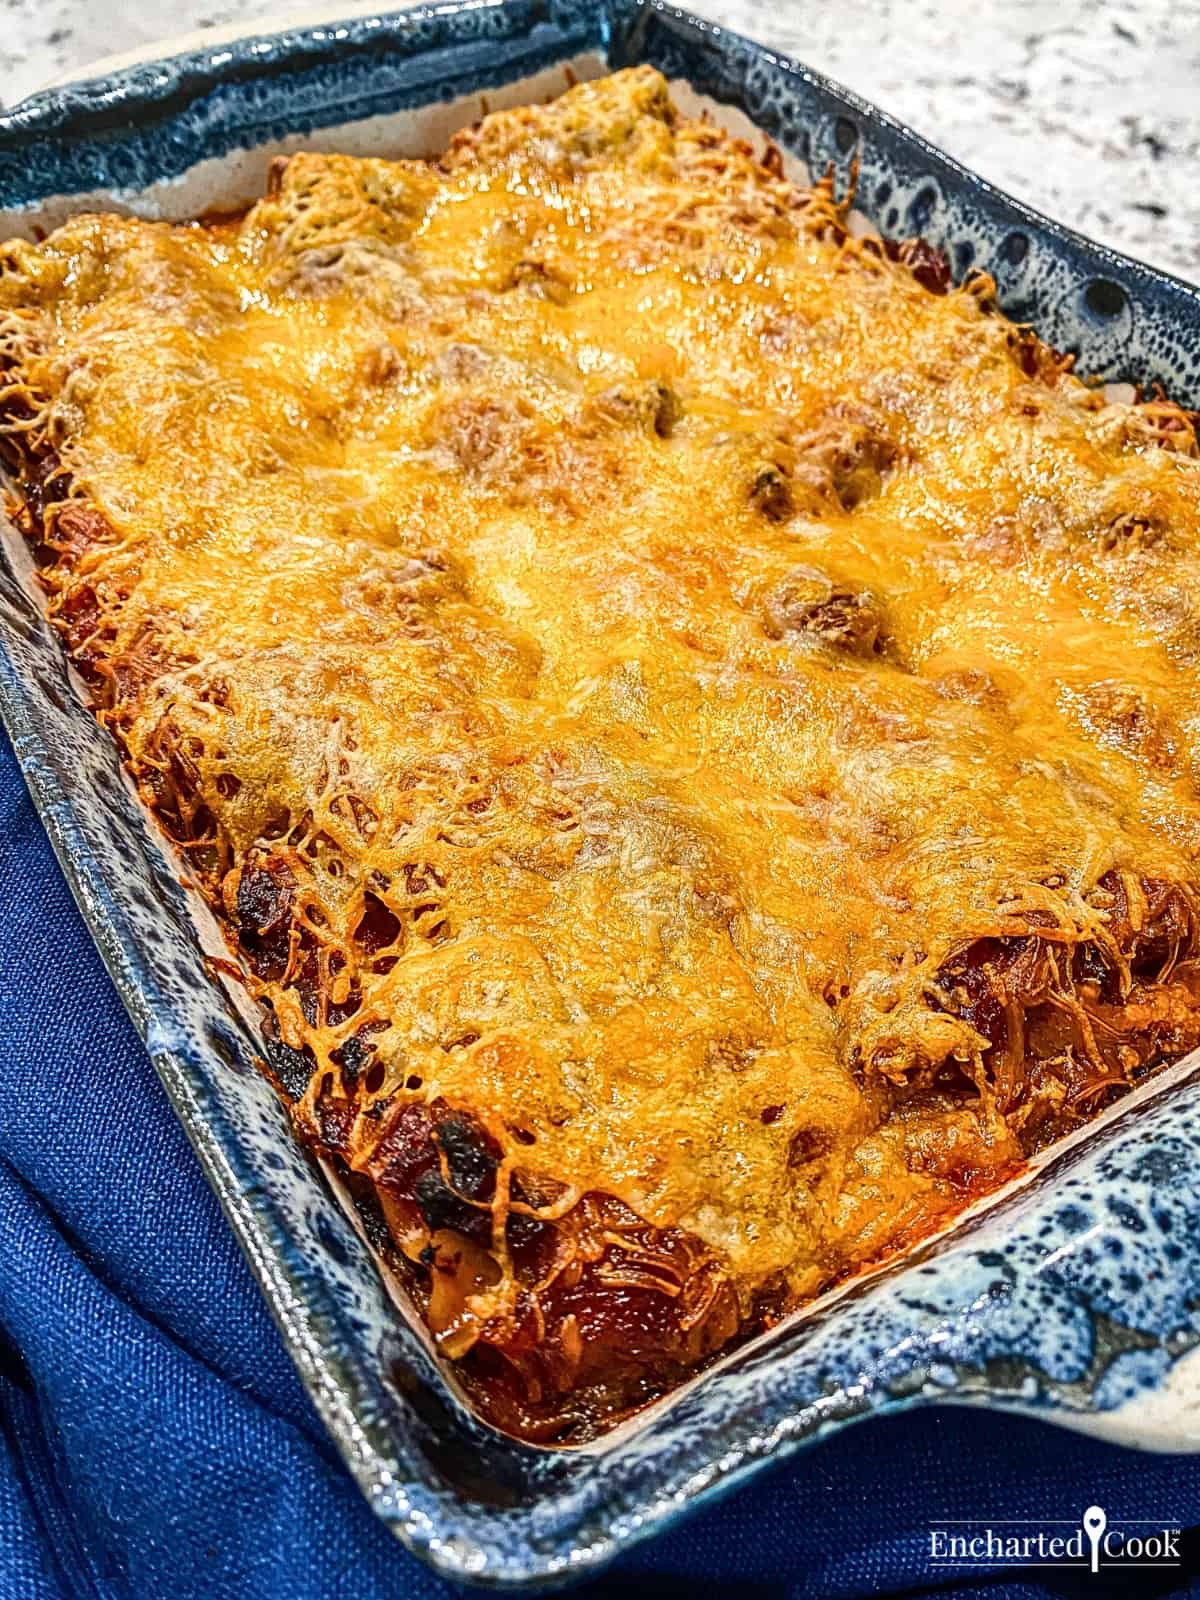 Layered lasagna with lots of melted cheese freshly removed from the oven.